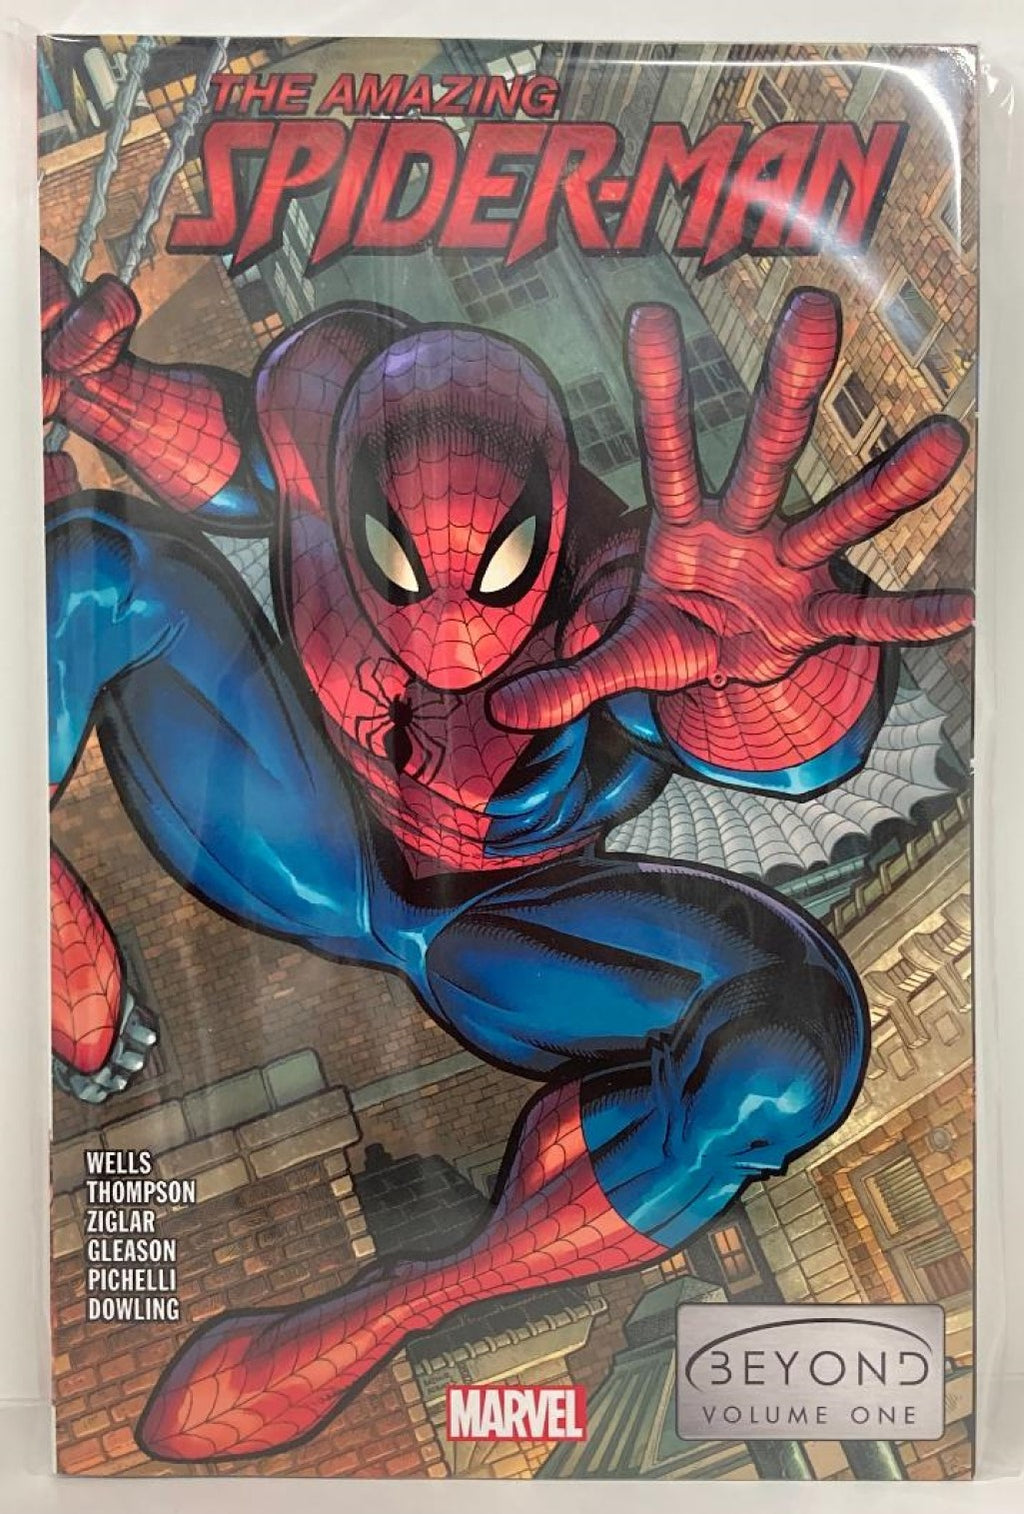 The Amazing Spider-Man Beyond Volume 1 - The Comic Warehouse